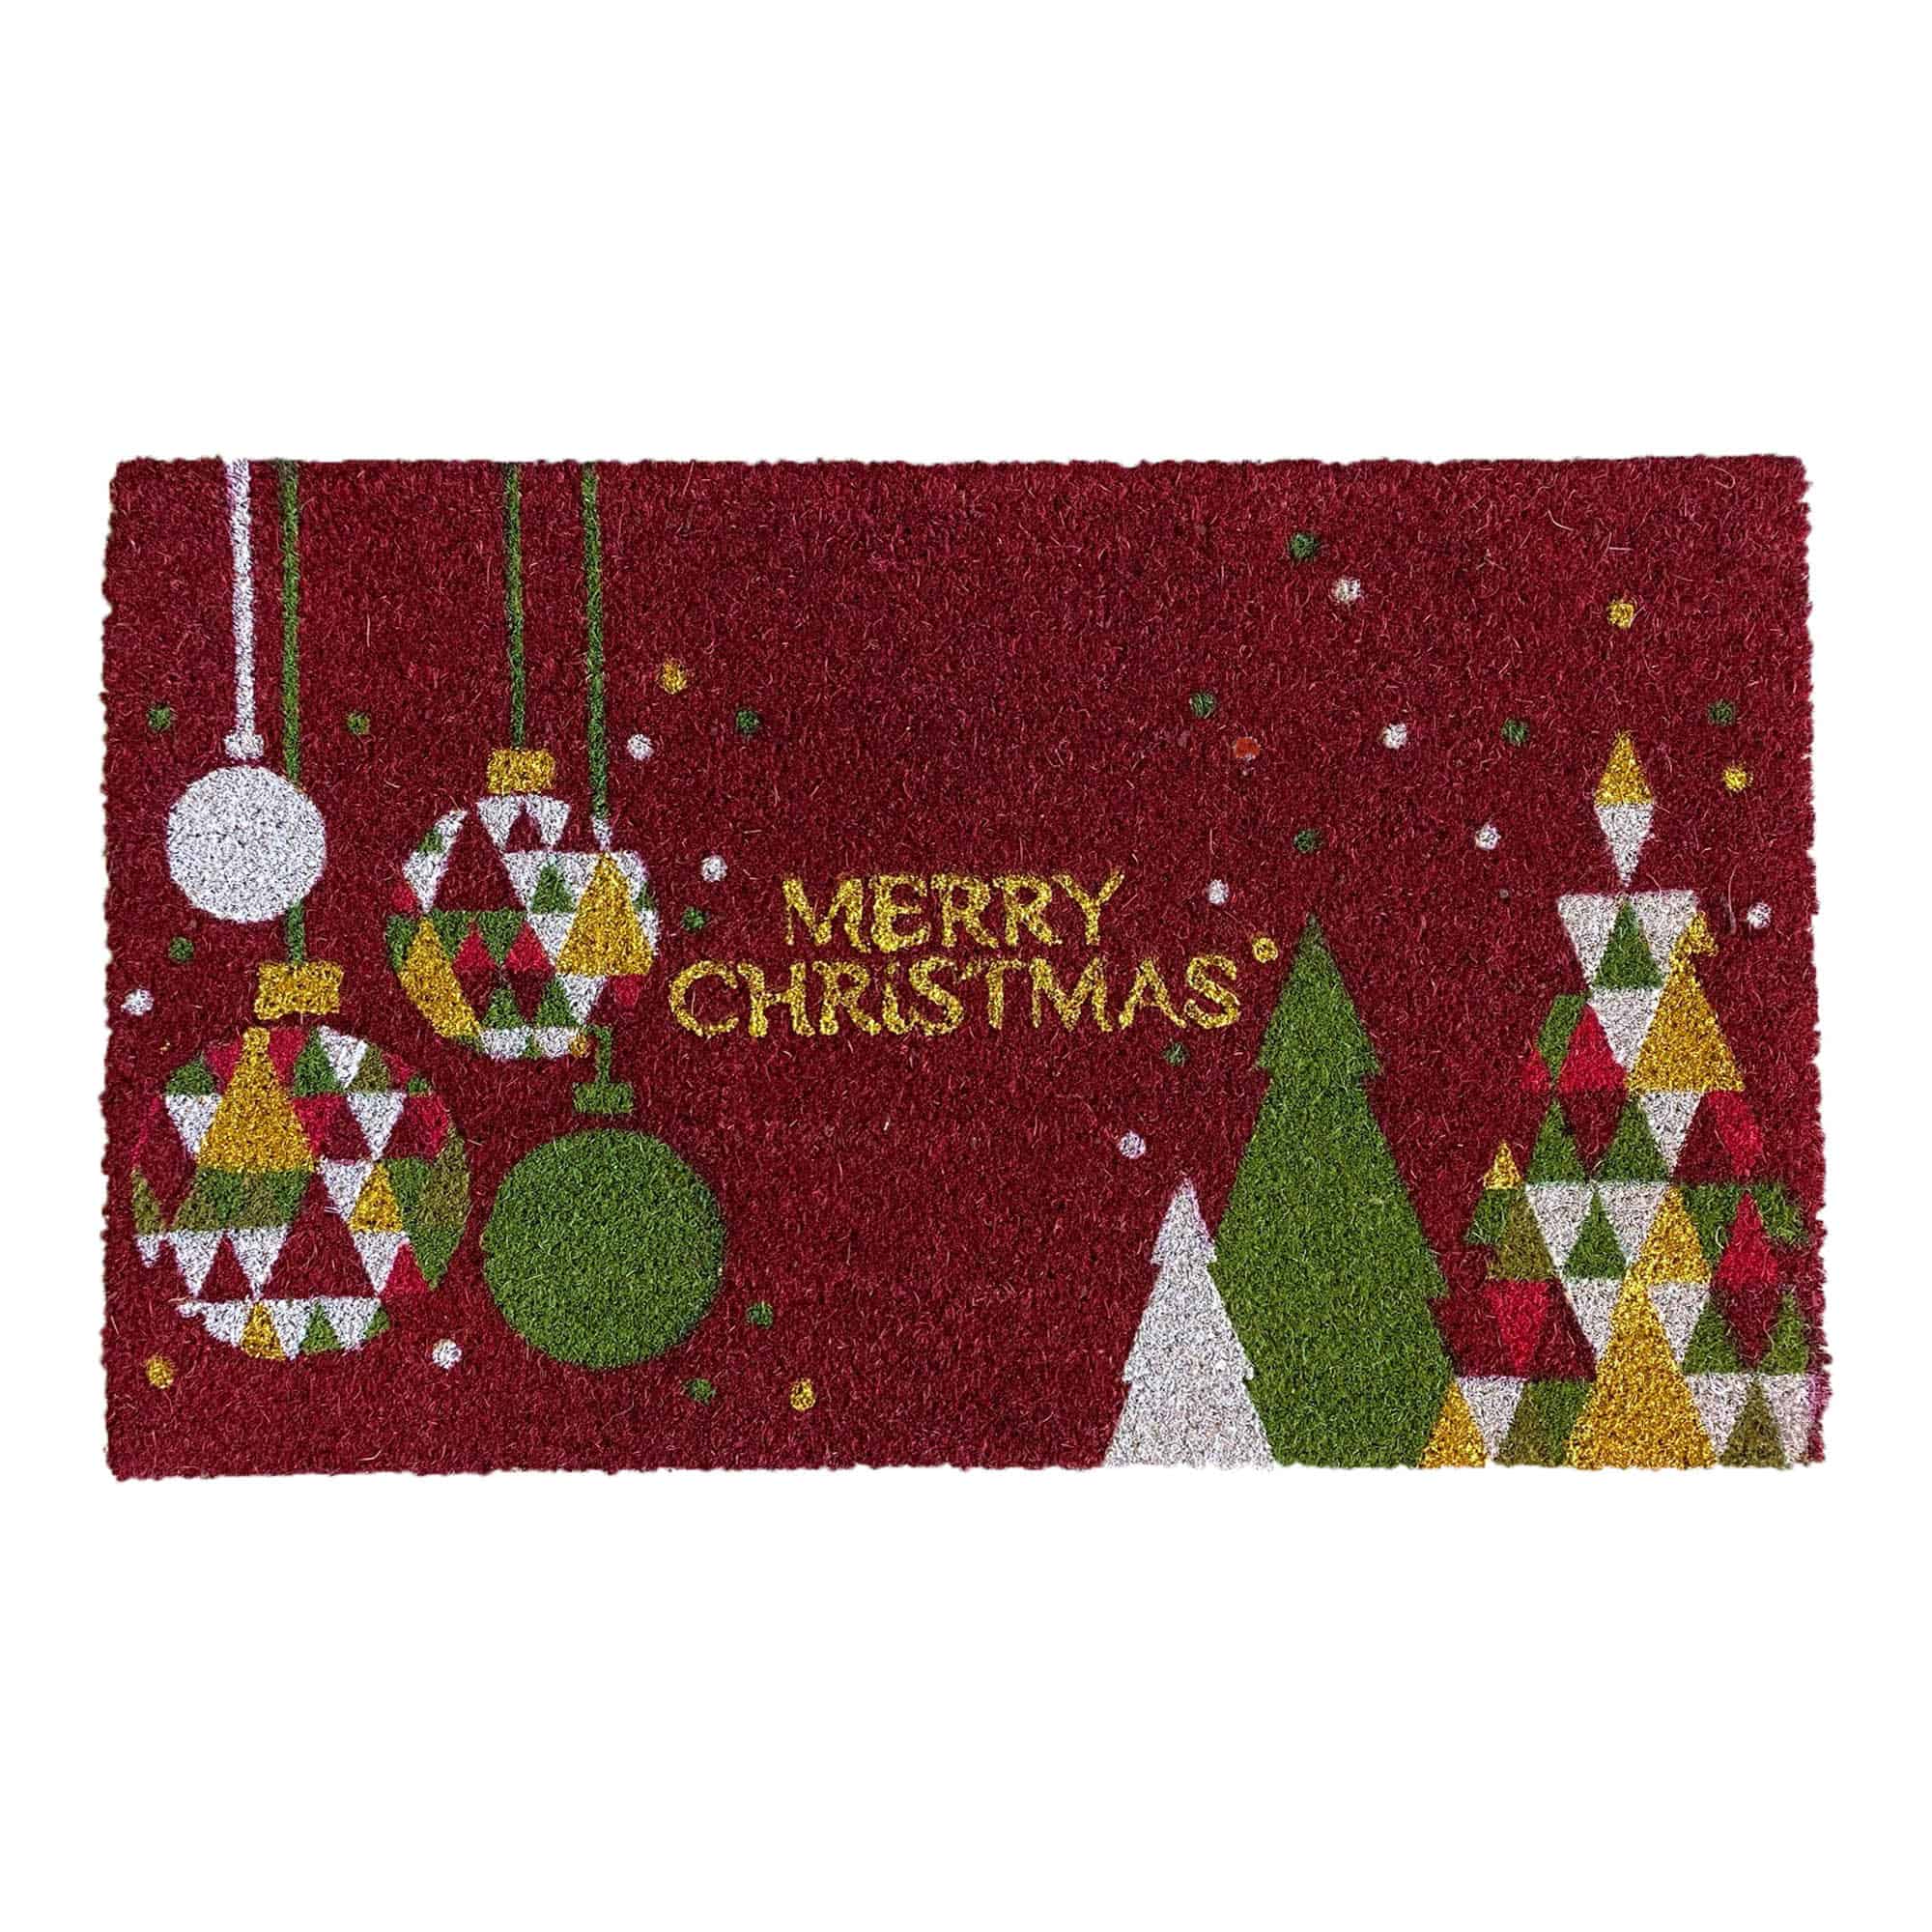 red christmas door mat with seasonal decorations in gold, green, white